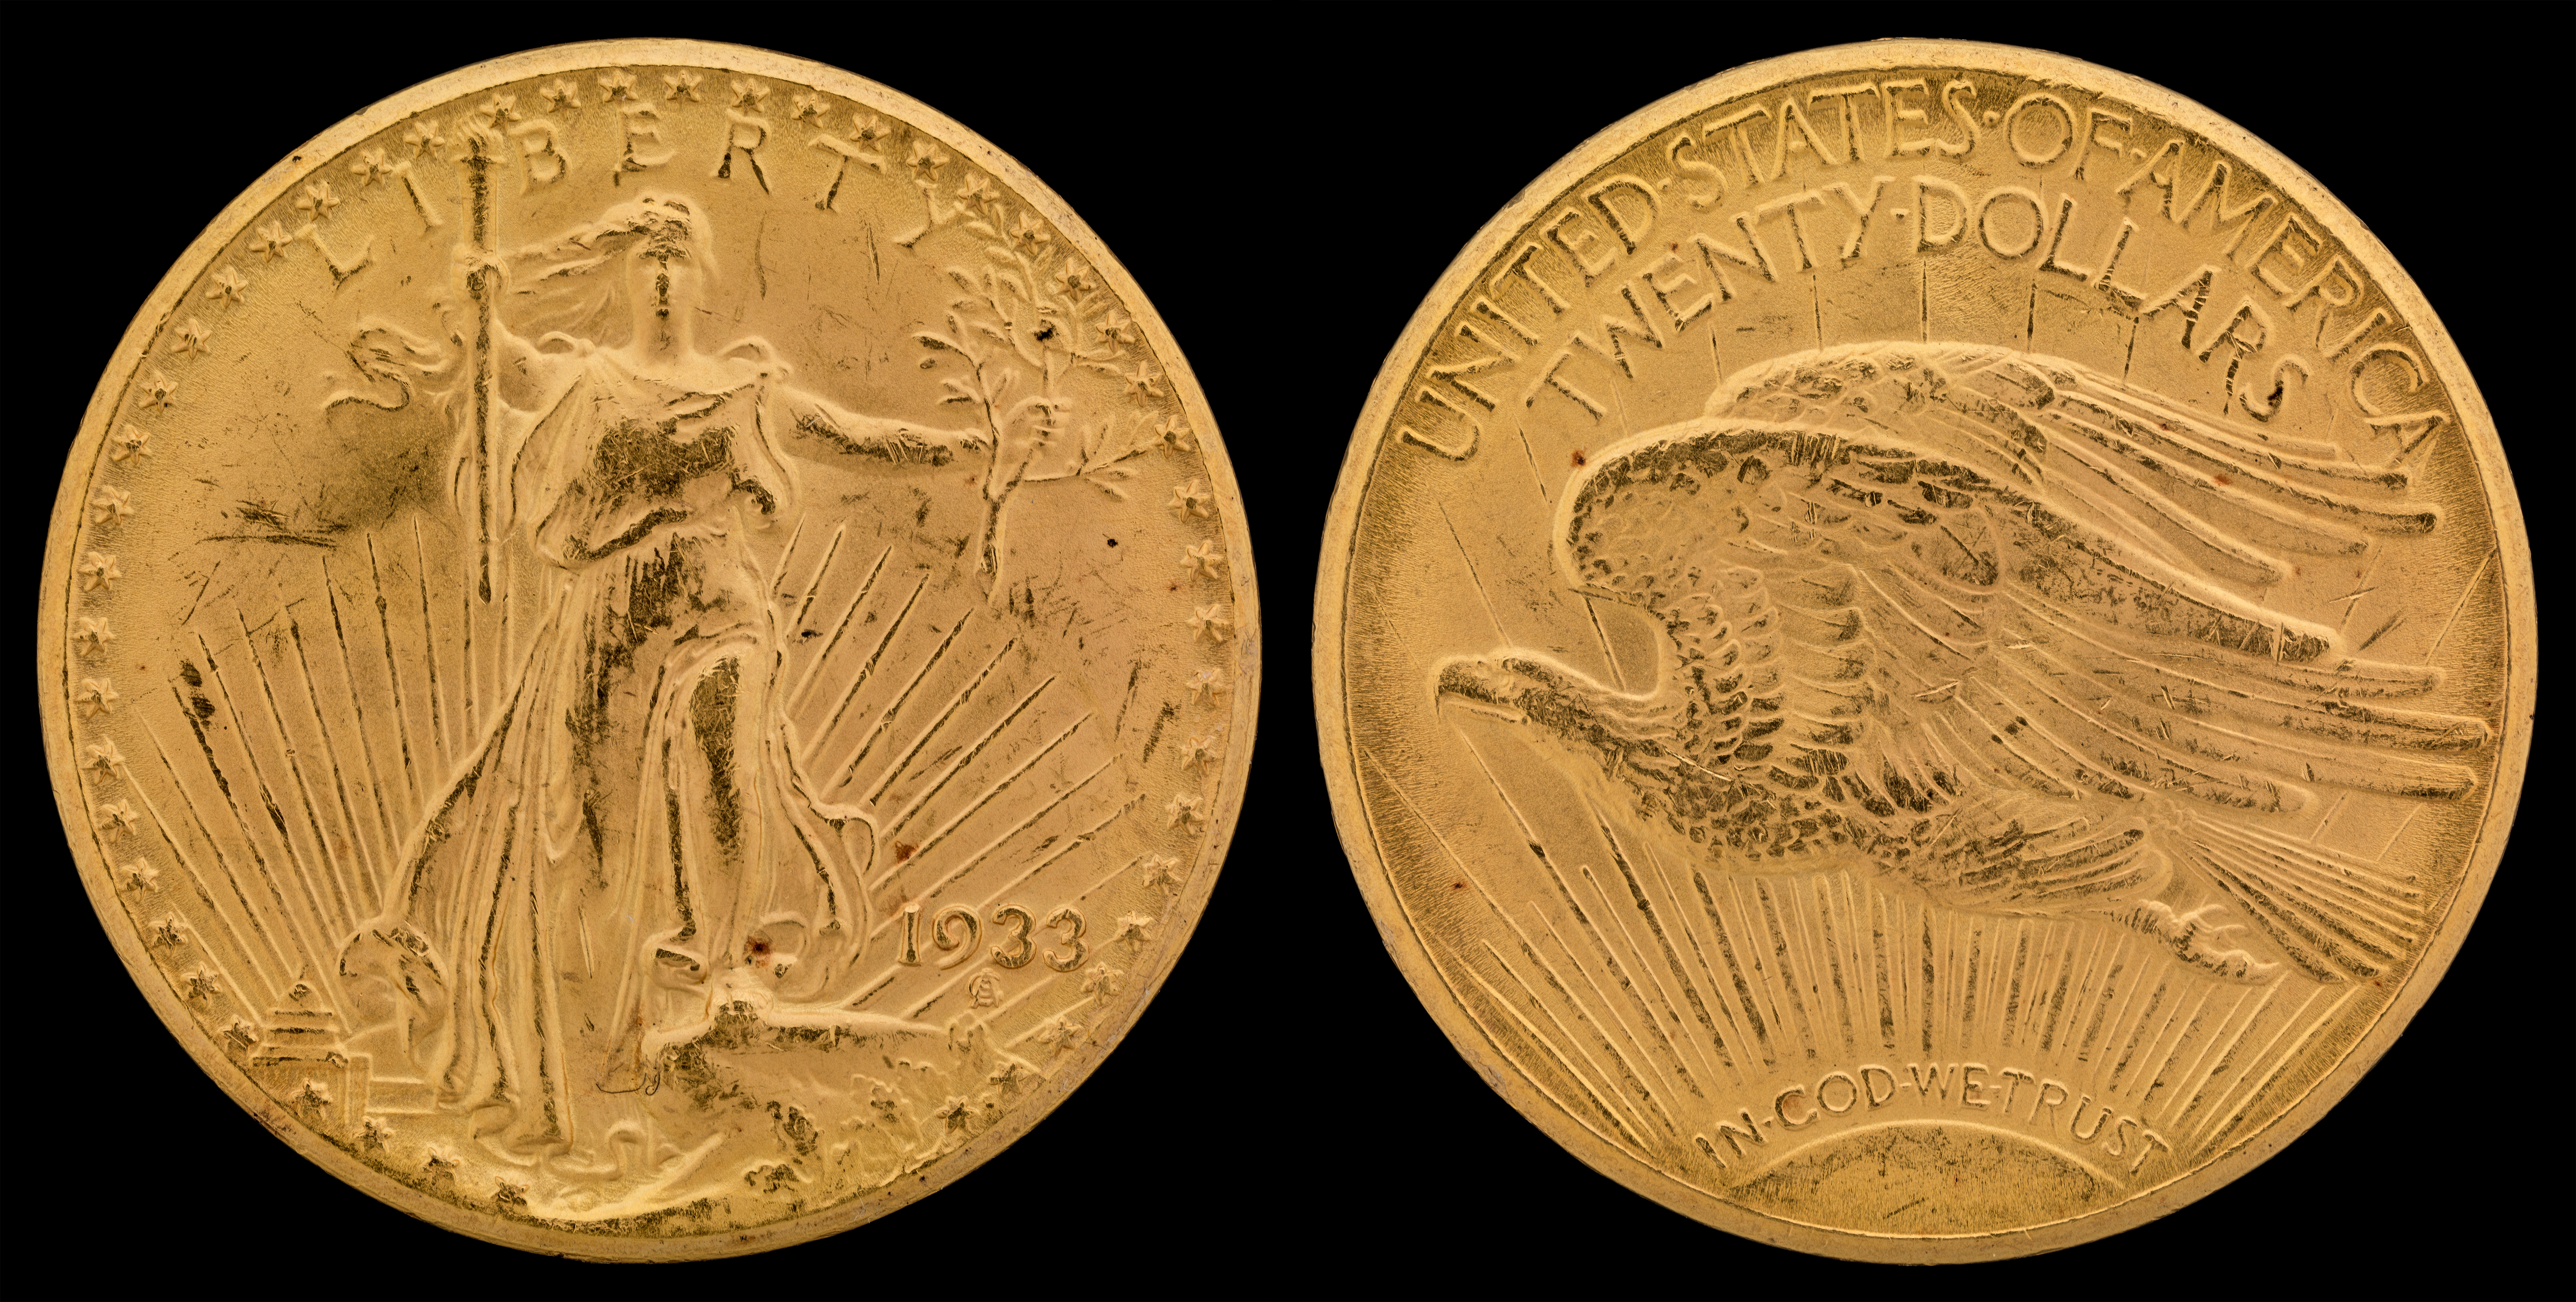 enlarged image for Mint to Display Three 1933 Double Eagles at ANA World’s Fair of Money